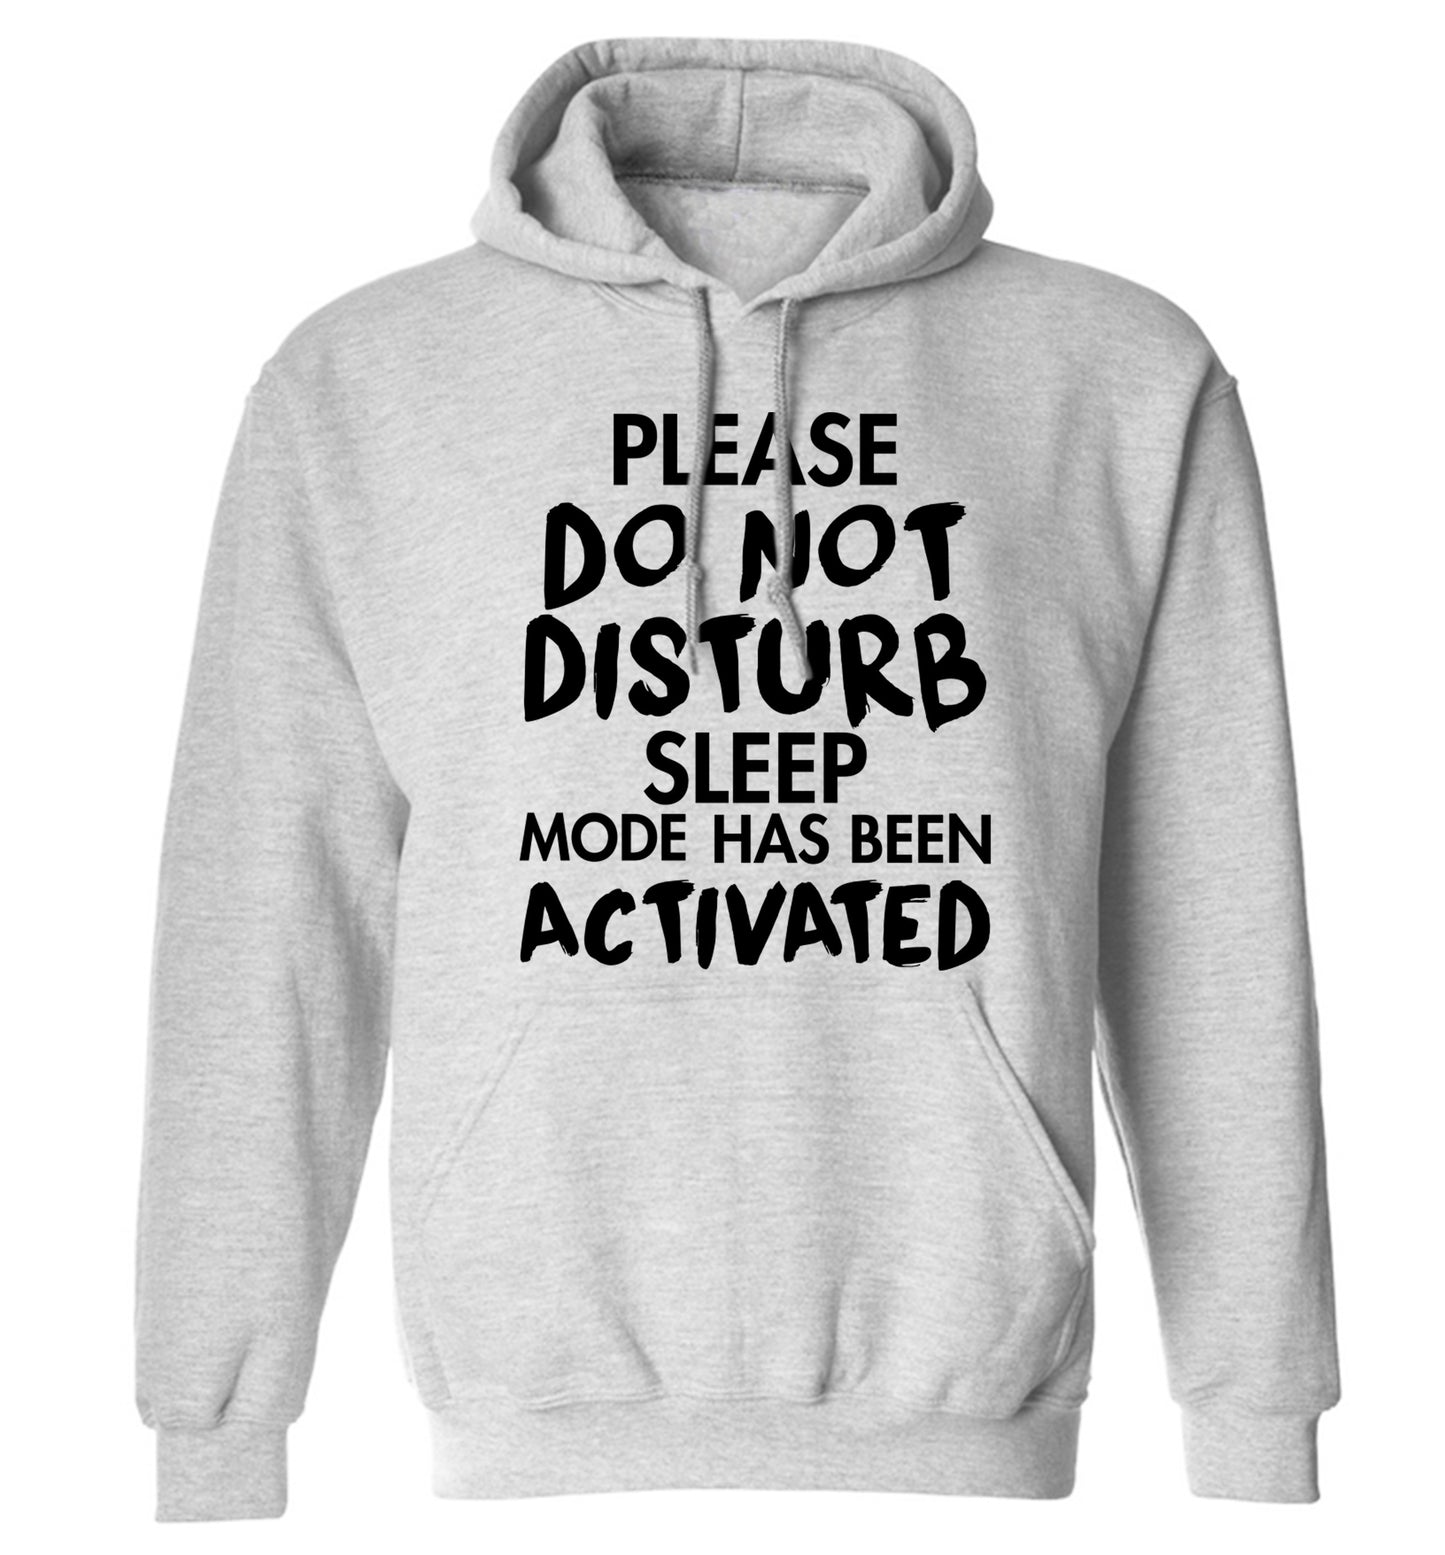 Please do not disturb sleeping mode has been activated adults unisex grey hoodie 2XL